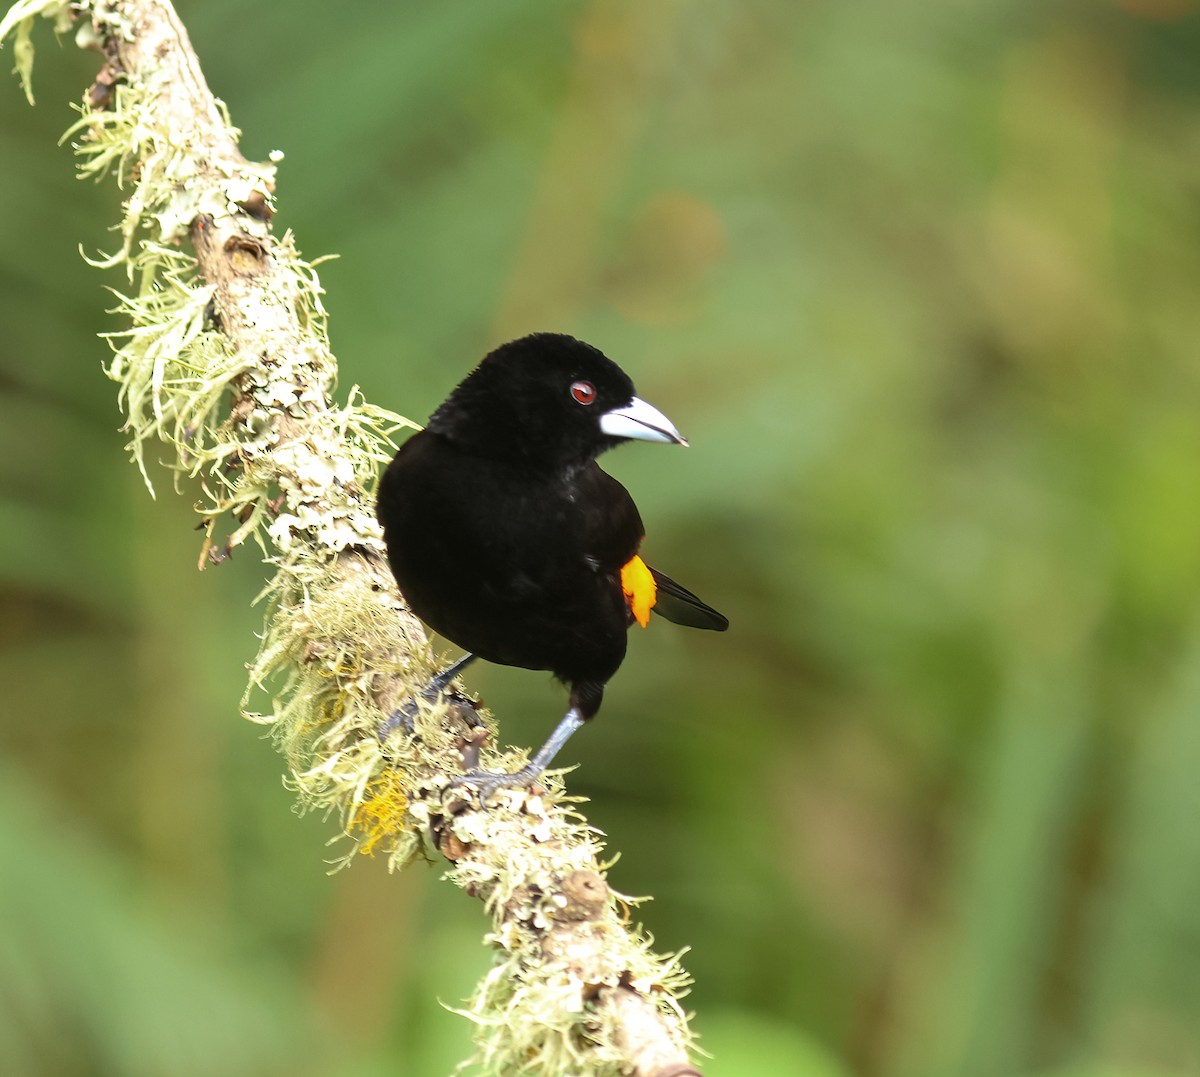 Flame-rumped Tanager (Flame-rumped) - Jill Casperson